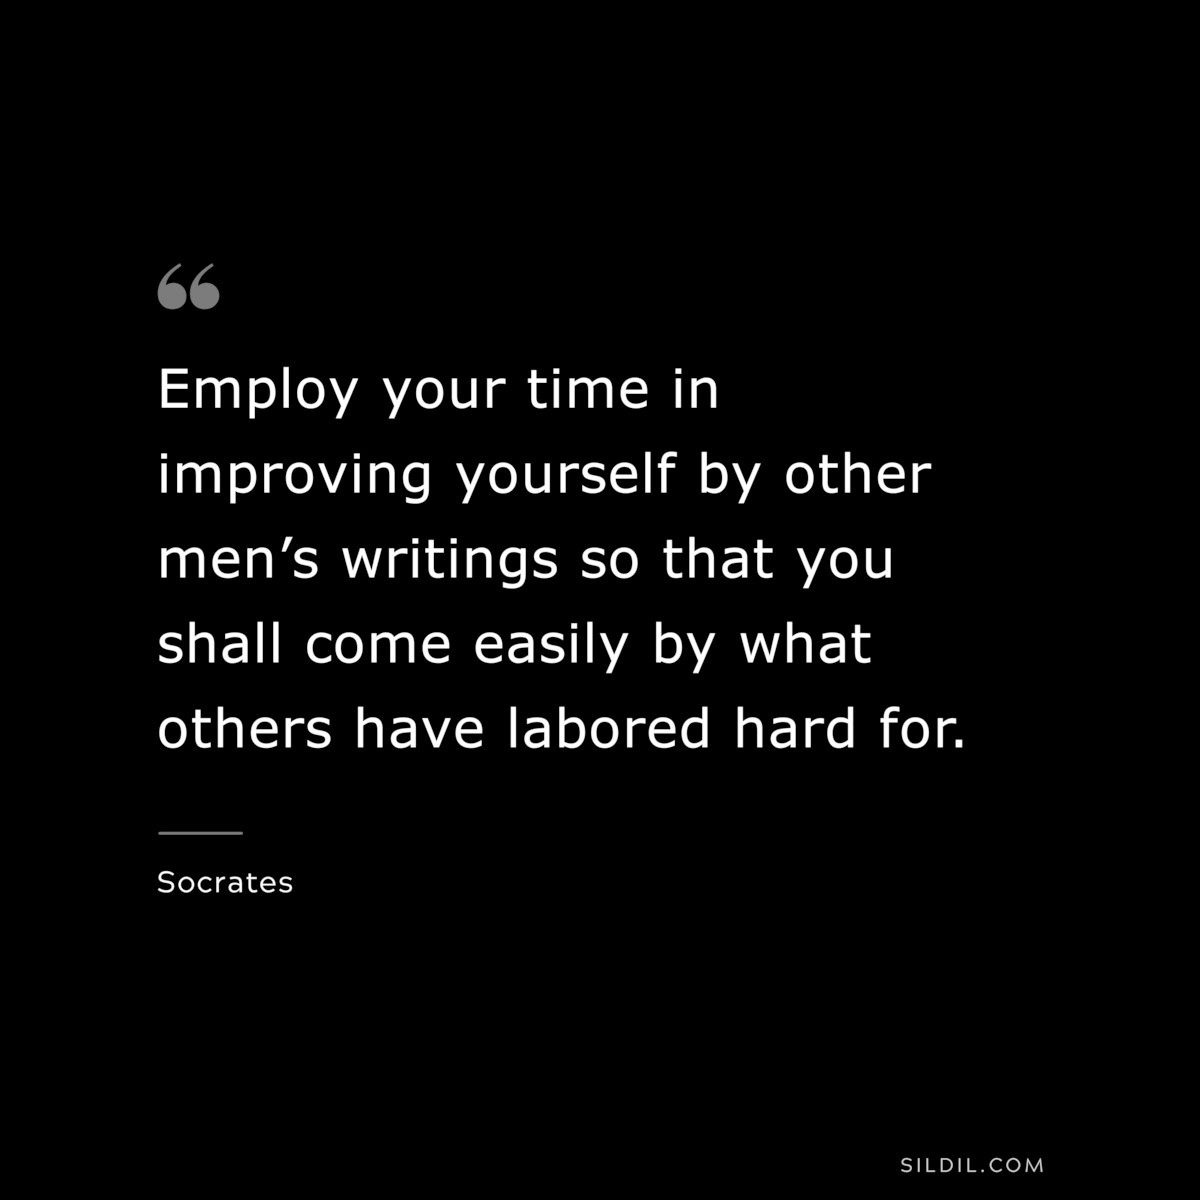 Employ your time in improving yourself by other men’s writings so that you shall come easily by what others have labored hard for. ― Socrates